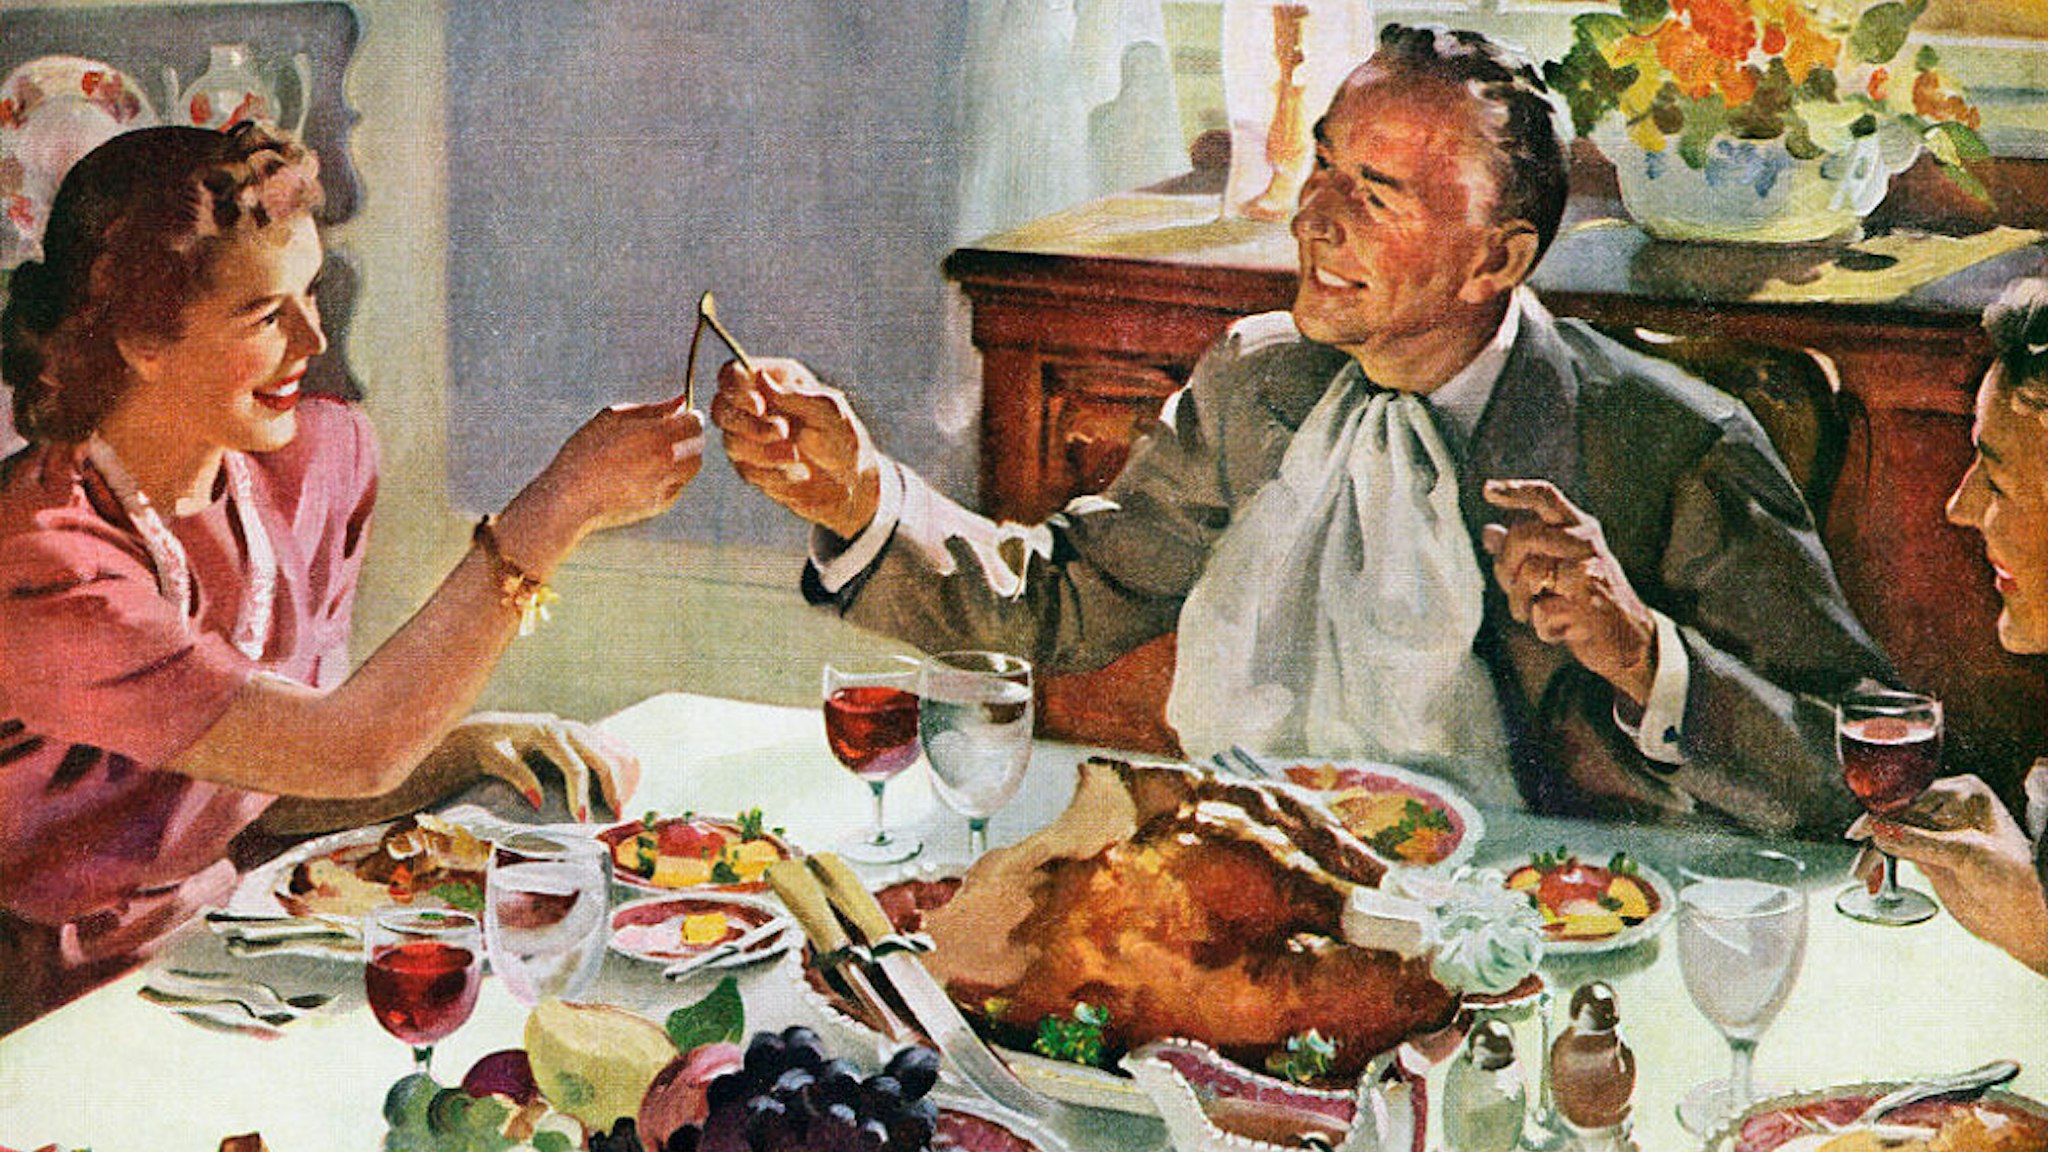 Vintage illustration of a husband and wife pulling the wishbone of a turkey for good luck at Thanksgiving dinner; screen print, 1942.